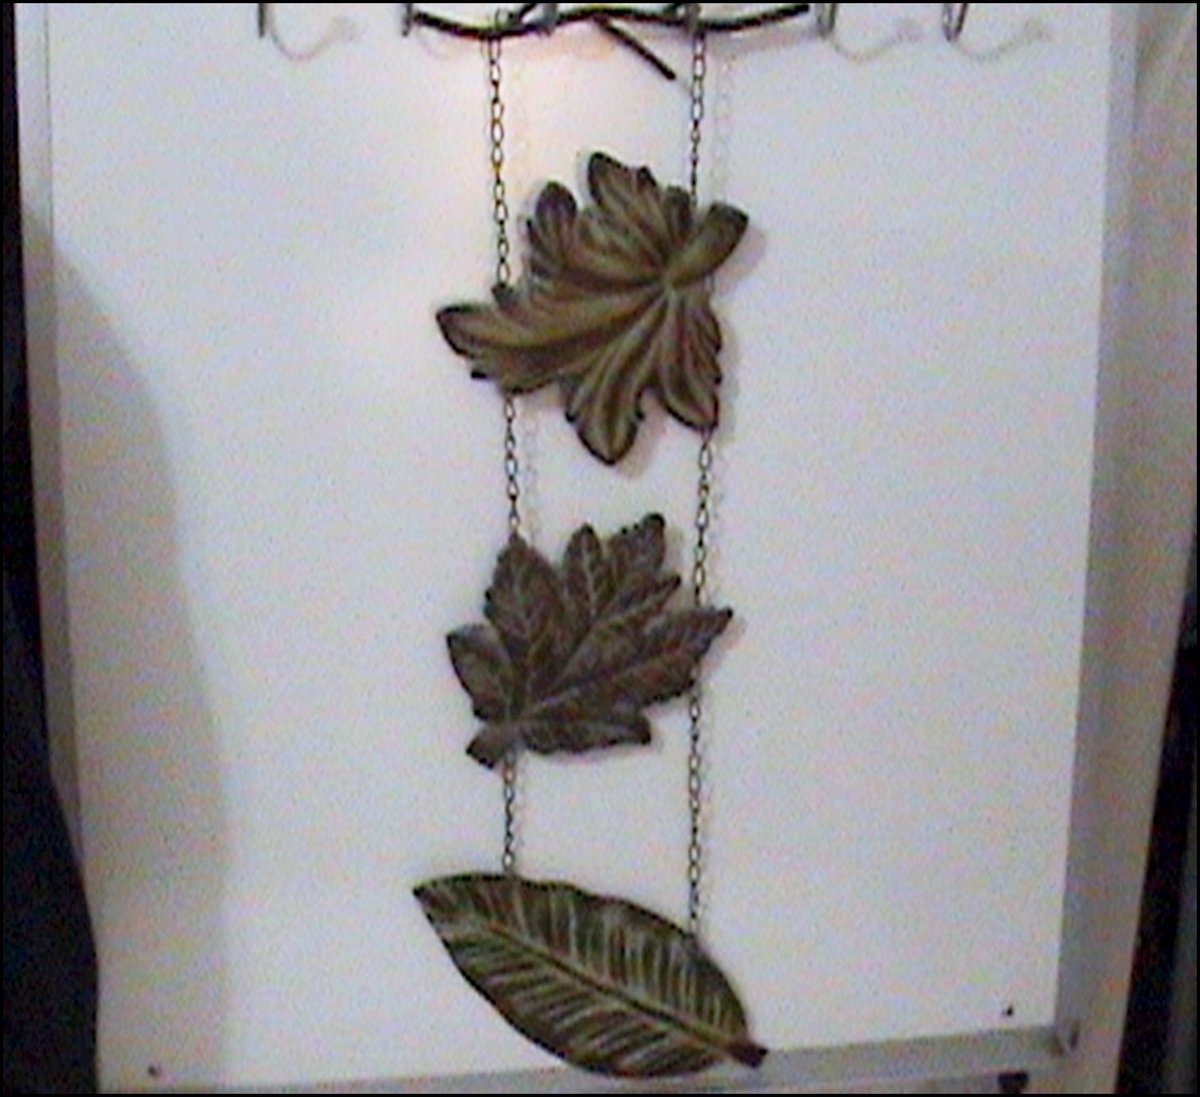 Excited to share the latest addition to my #etsy shop: Indoor/Outdoor Leaf Hanging etsy.me/2EVJA6r #housewares #homedecor #green #brown #unframed #kitchendining #patiodecor #metalwallhanging #gardendecor